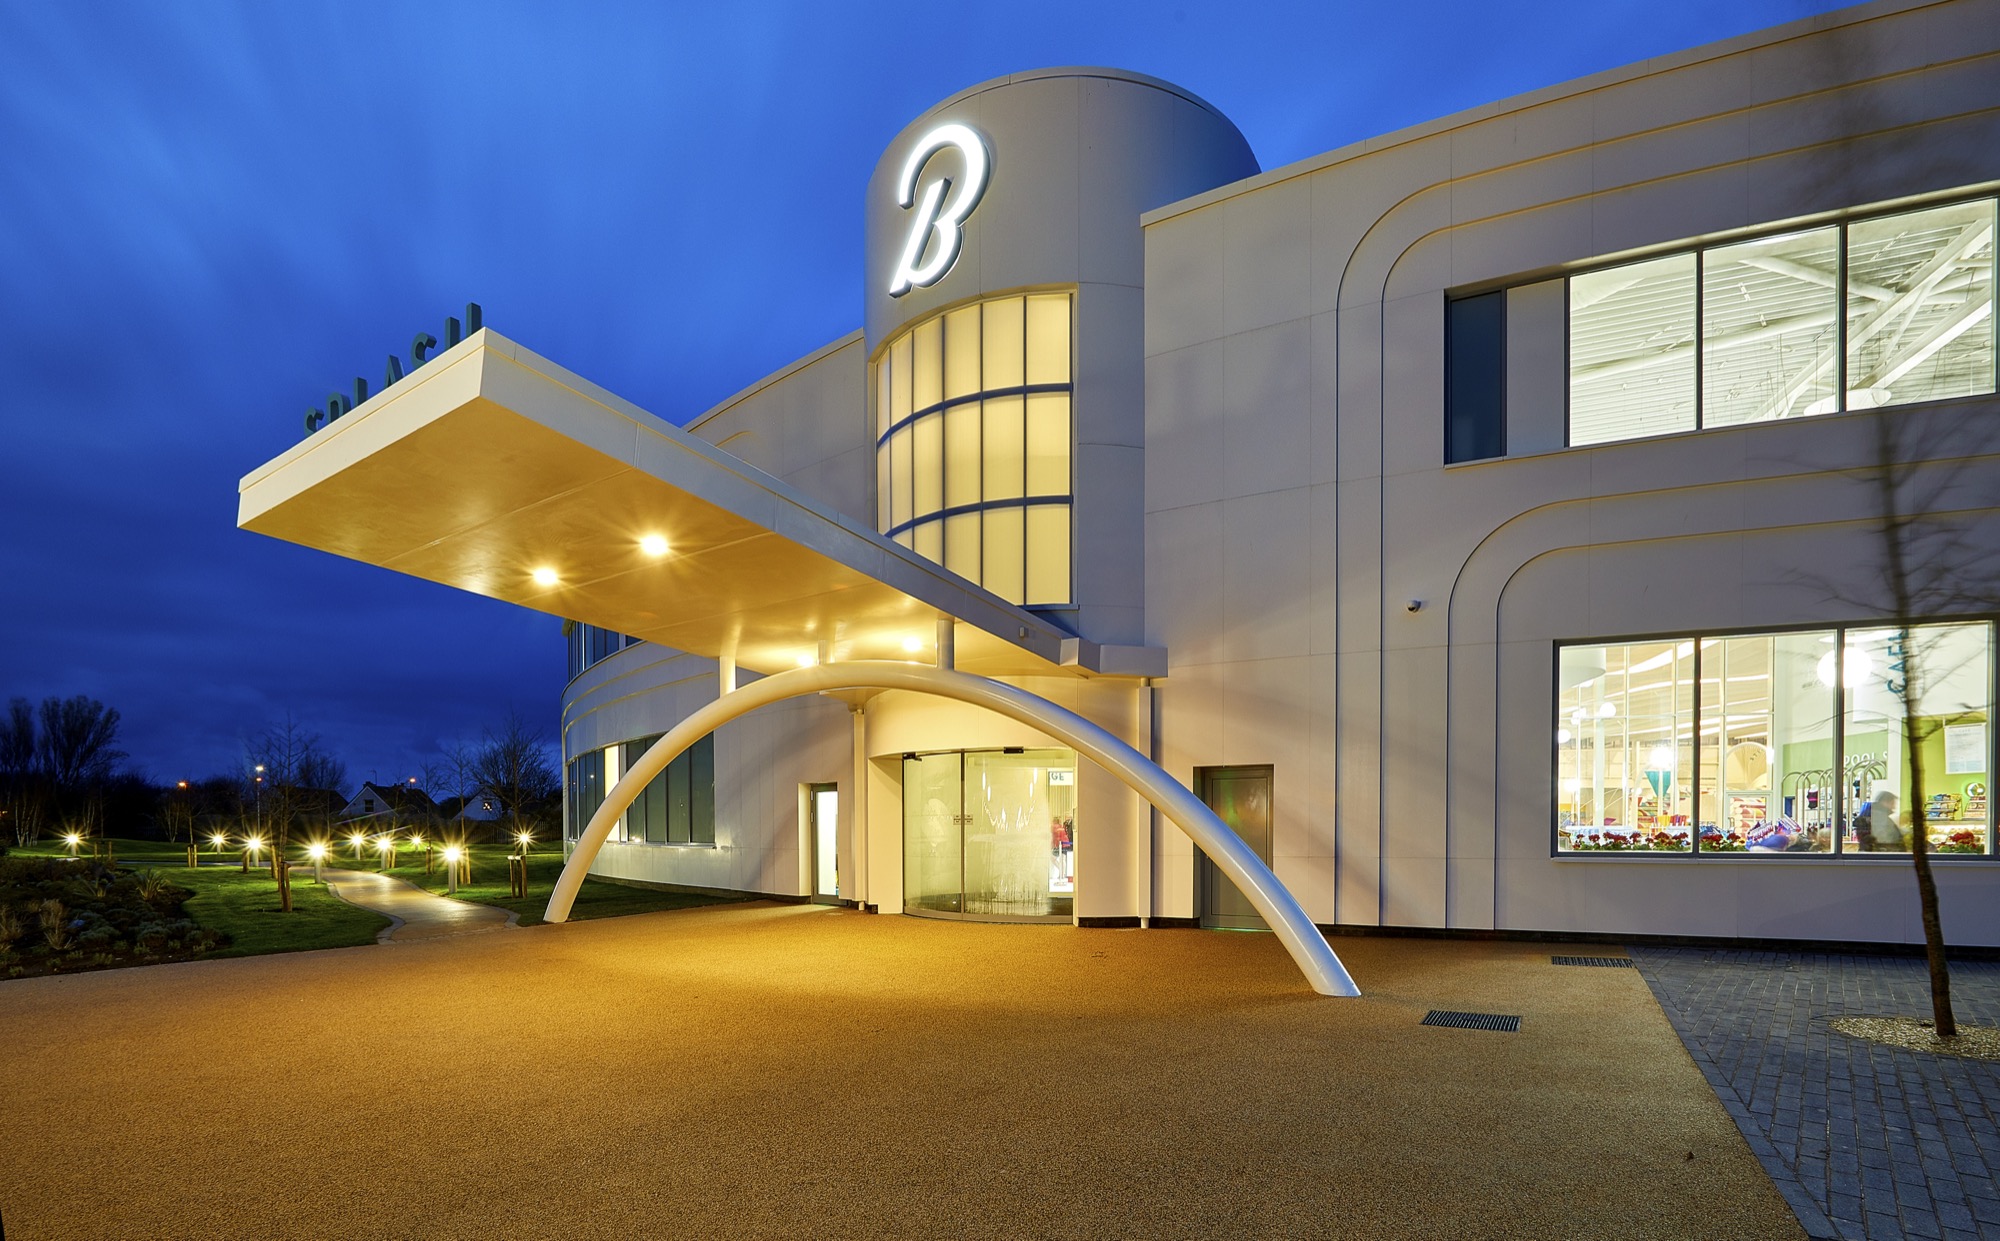 Our Hotel signage for Butlins Illuminated sign